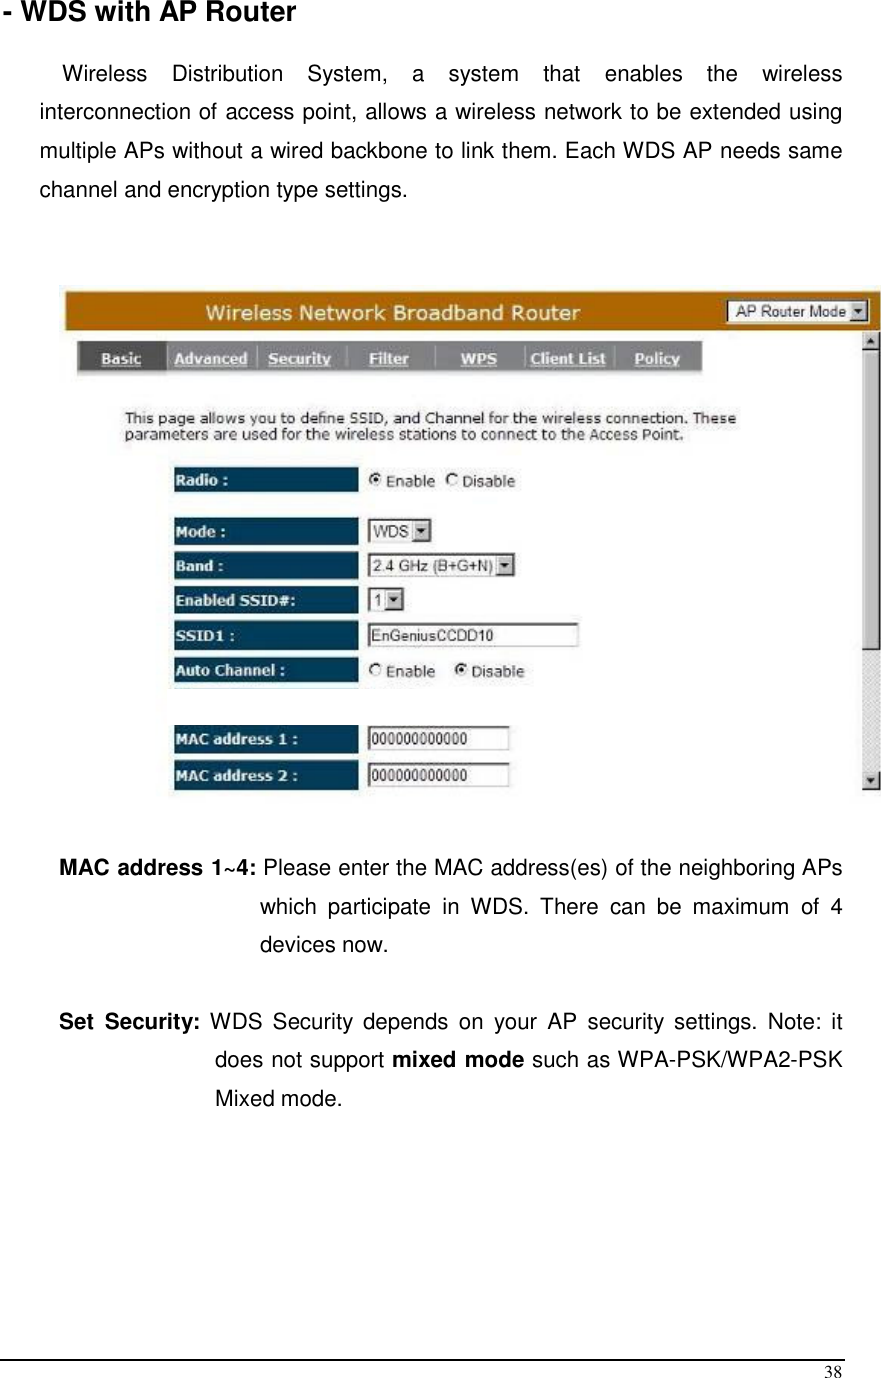  38 - WDS with AP Router  Wireless  Distribution  System,  a  system  that  enables  the  wireless interconnection of access point, allows a wireless network to be extended using multiple APs without a wired backbone to link them. Each WDS AP needs same channel and encryption type settings.     MAC address 1~4: Please enter the MAC address(es) of the neighboring APs which  participate  in  WDS.  There  can  be  maximum  of  4 devices now.   Set  Security:  WDS  Security  depends  on  your  AP  security settings.  Note:  it does not support mixed mode such as WPA-PSK/WPA2-PSK Mixed mode.      